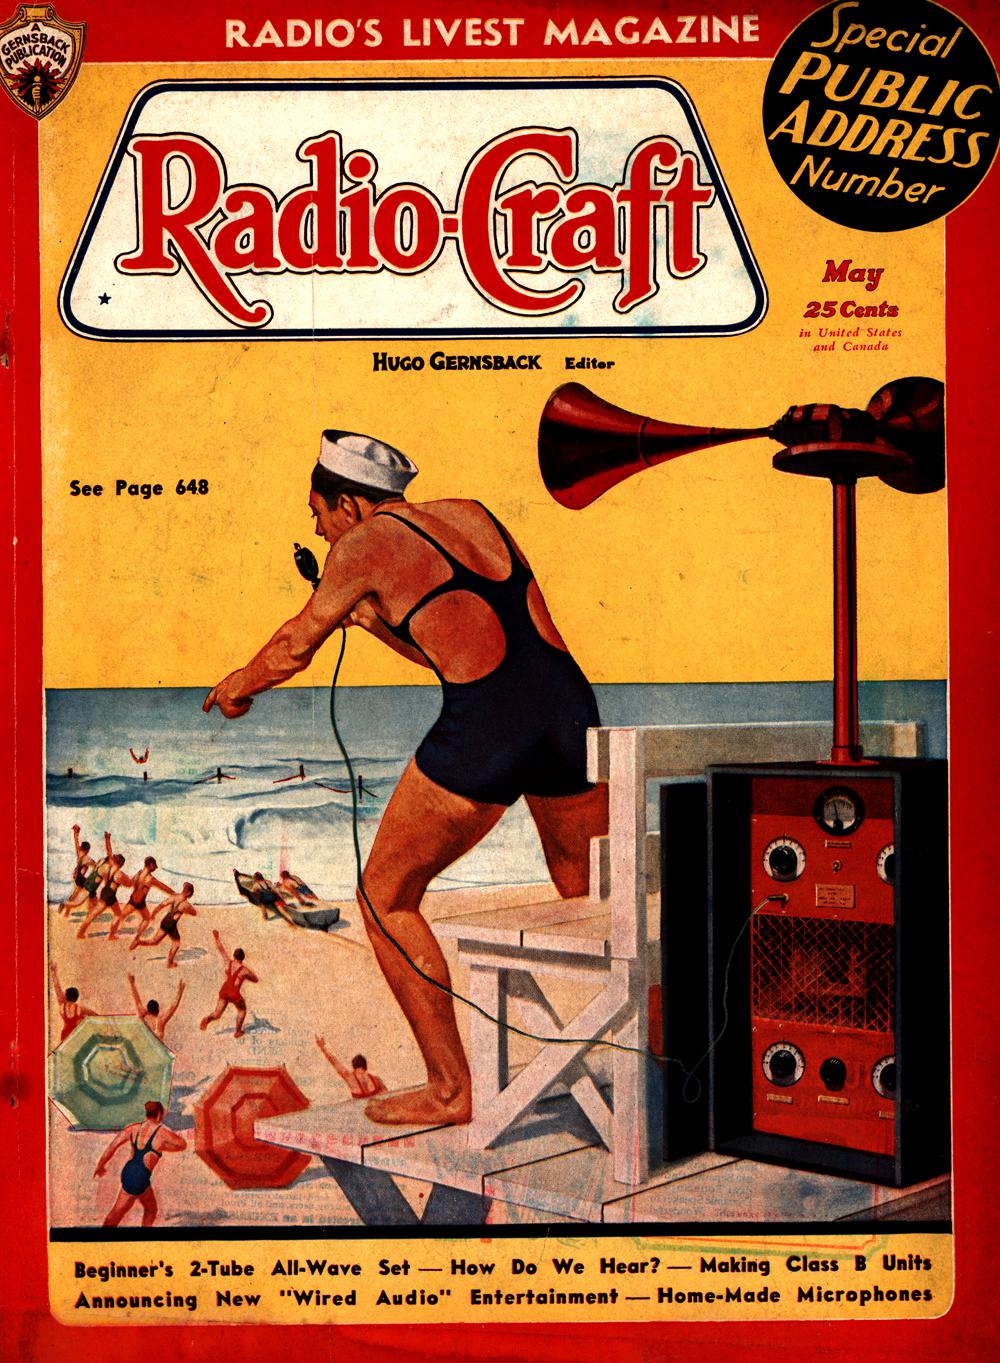 1936 - Radio-craft. and popular electronics; radio-electronics in all its phases - Vol. 7, No. 11